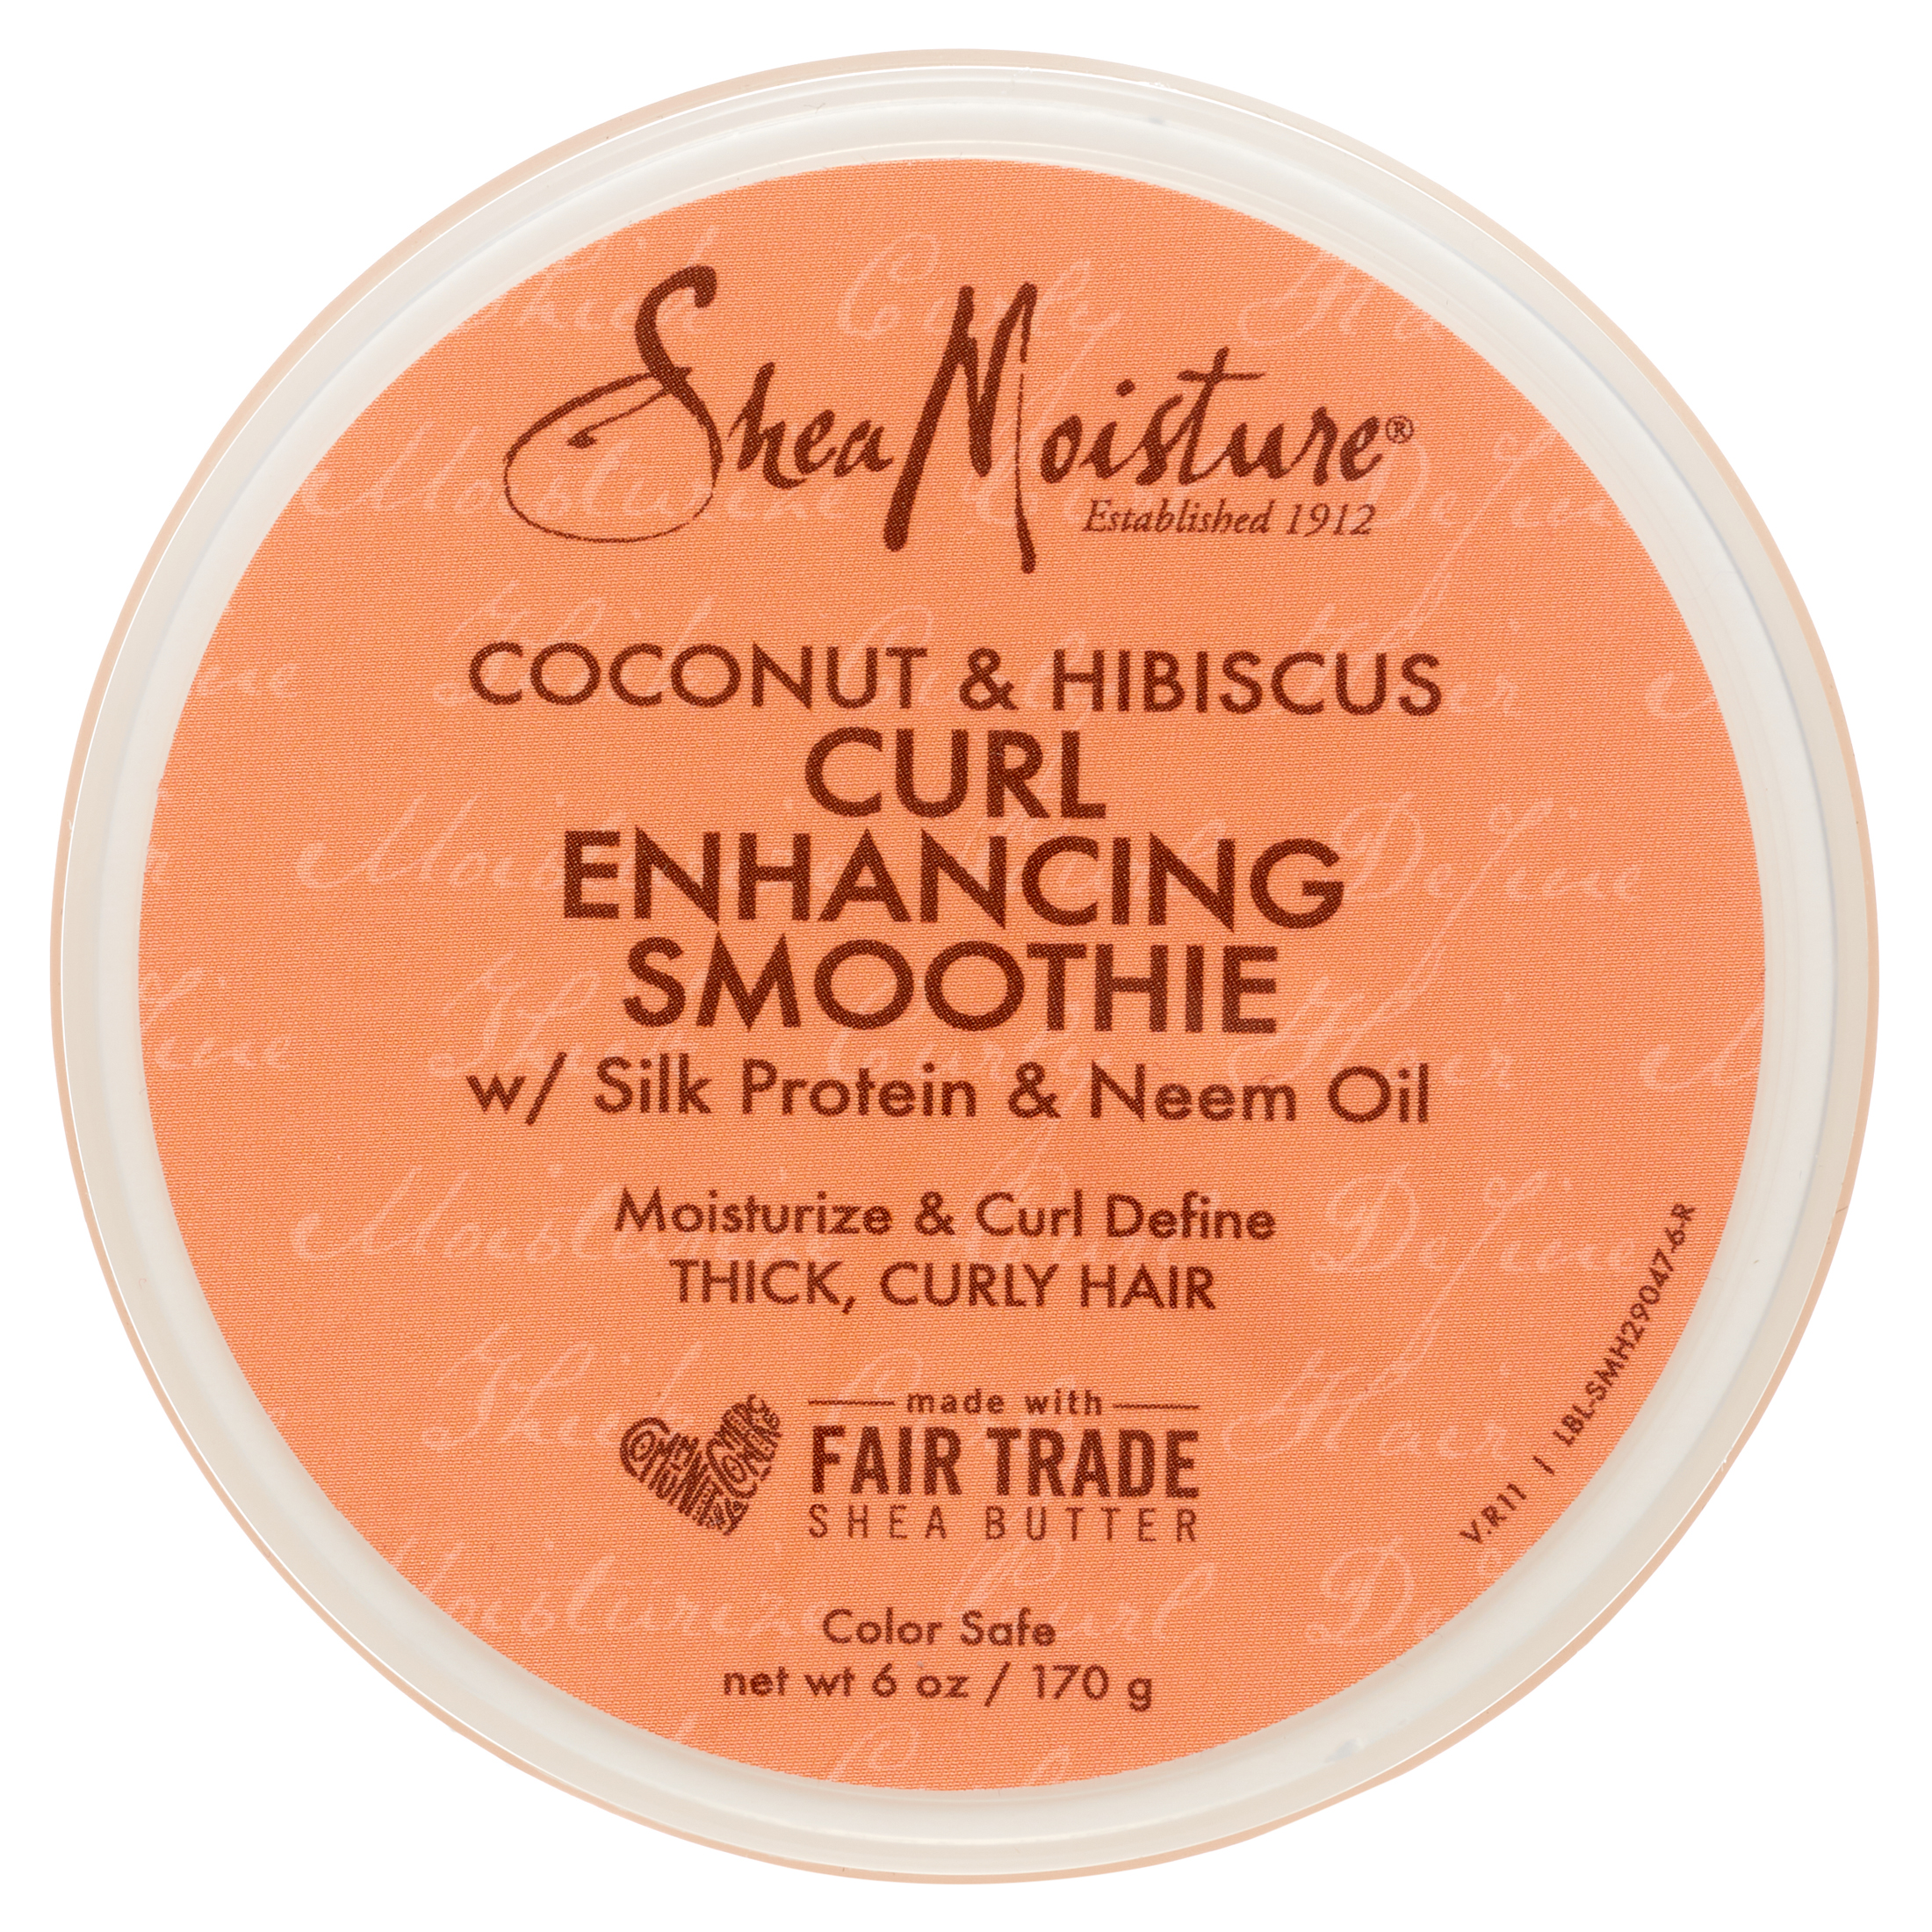 SheaMoisture Coconut & Hibiscus Curl Enhancing Smoothie for Thick, Curly Hair, 6 oz - image 2 of 9